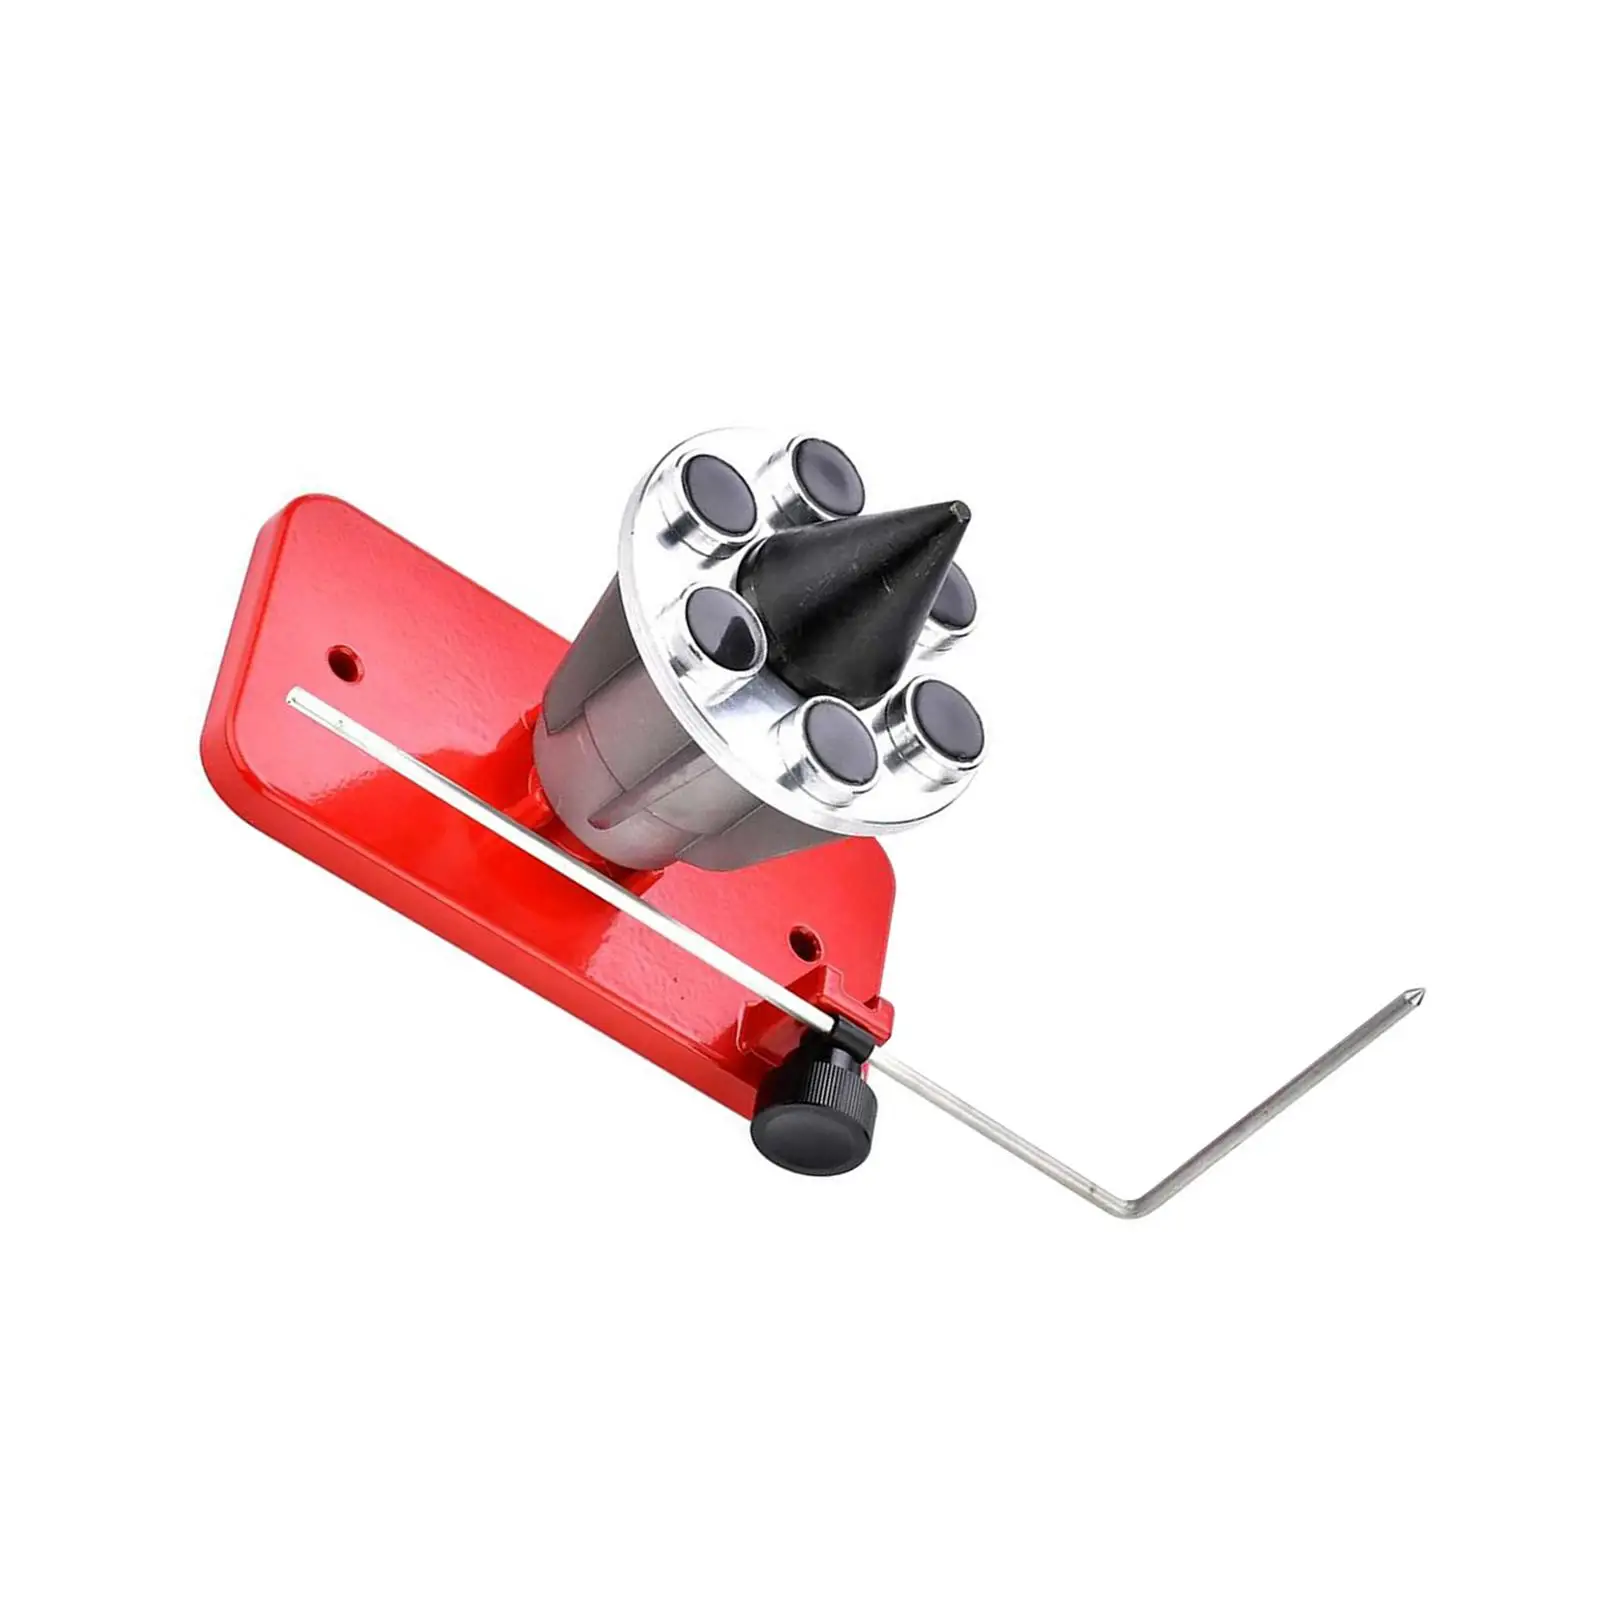 Universal Blade Balancer Reduced Vibration Wall Mount Red 20cm 339075B Balance Blade after Sharpening for All Lawnmower Parts